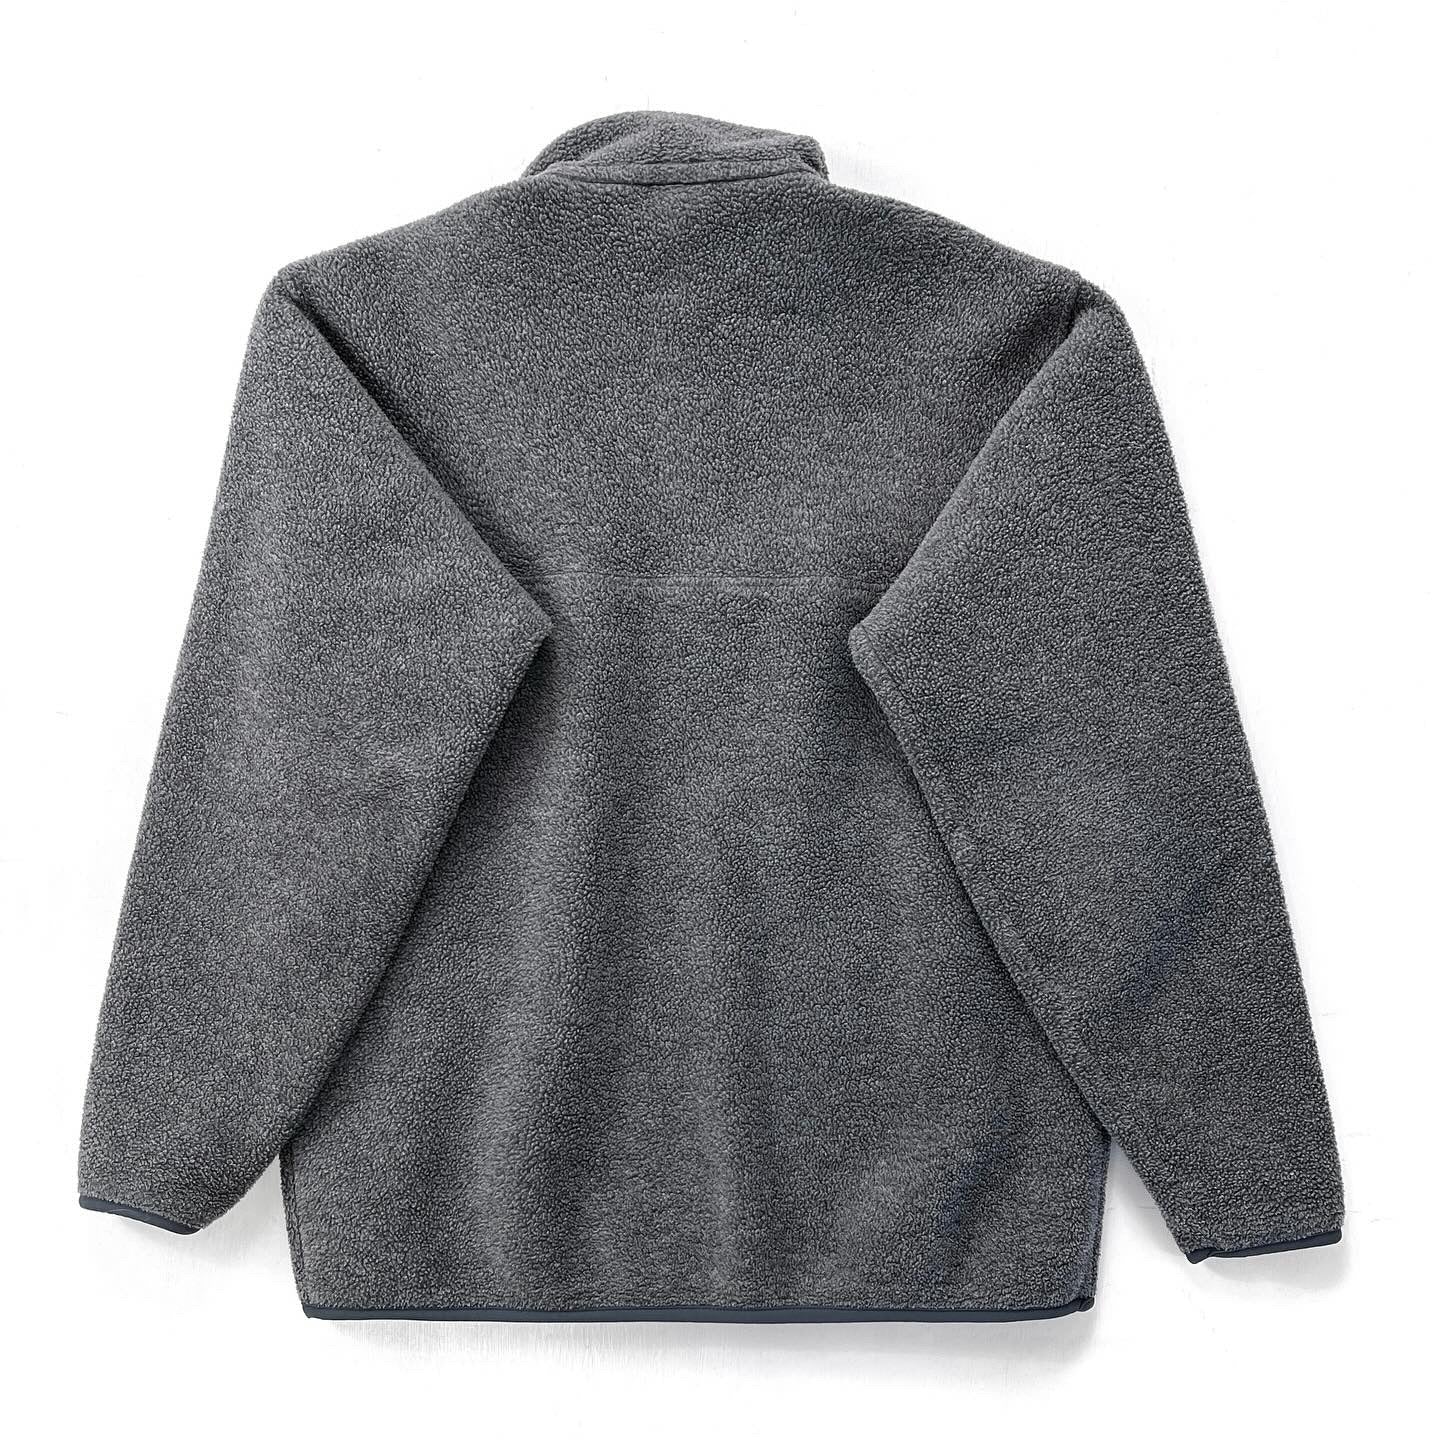 2005 Patagonia Synchilla Snap-T Pullover, Charcoal Heather (M)